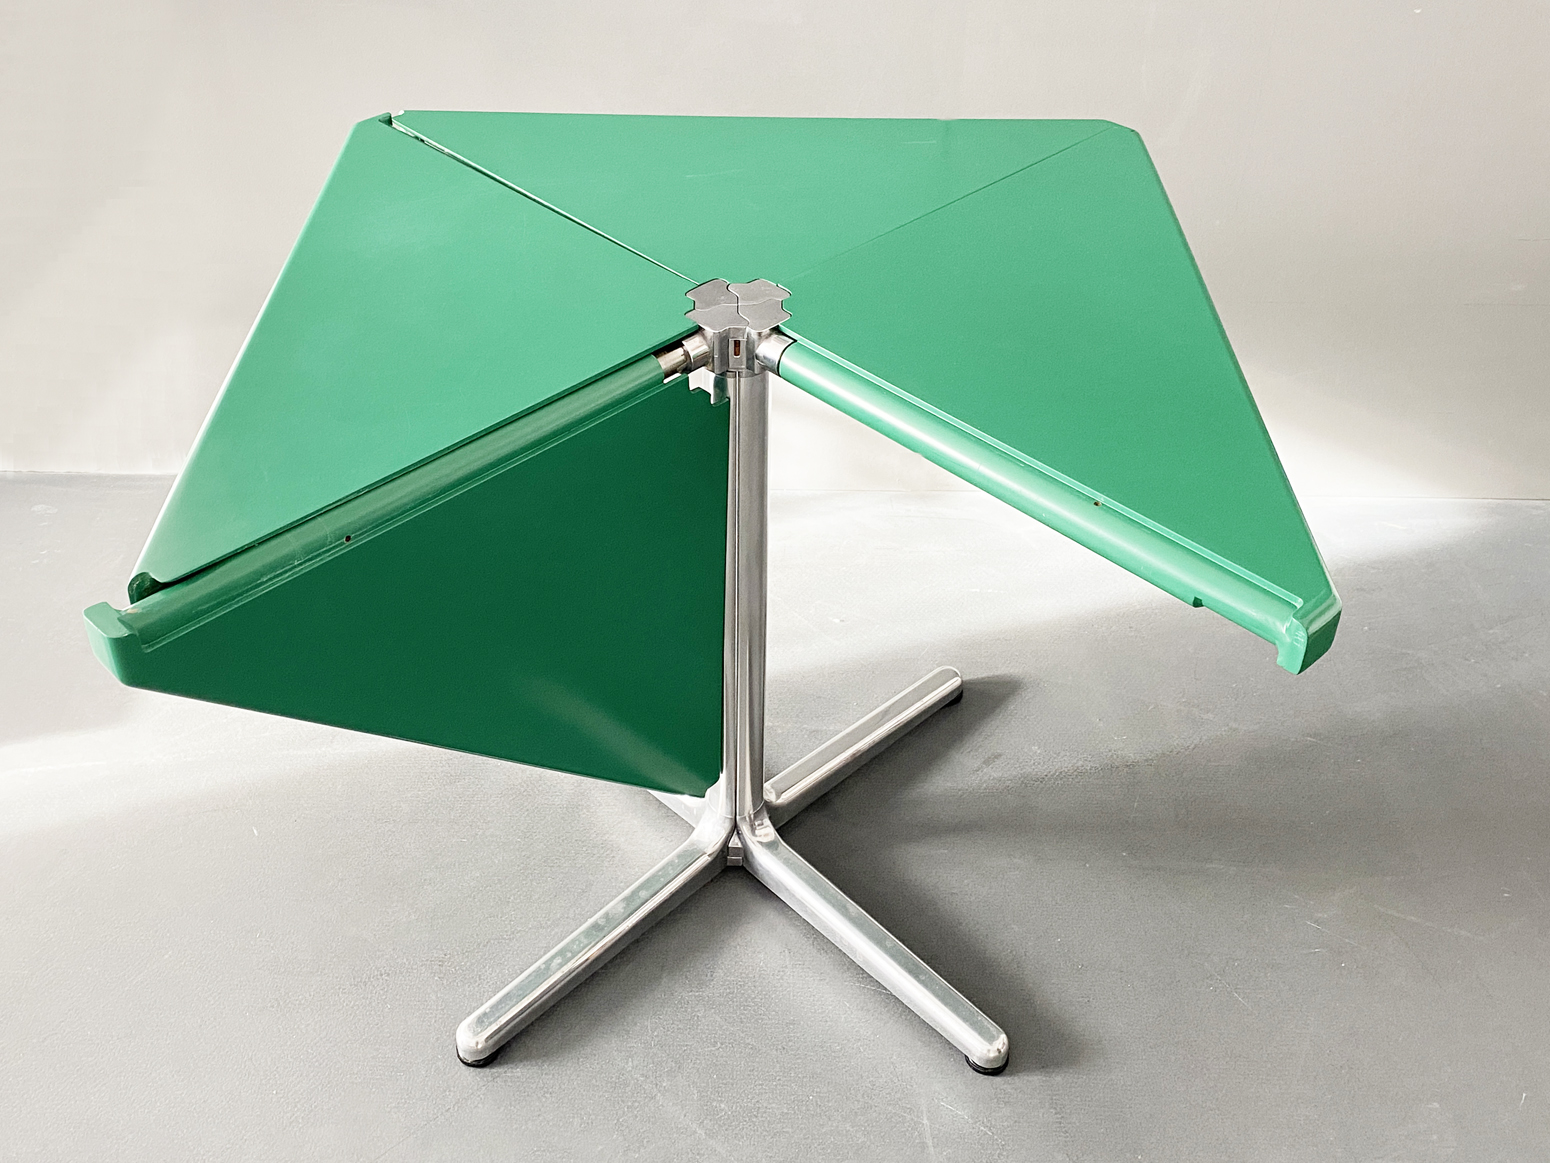 “SOLD” Plana Folding Table by Giancarlo Piretti for Castelli. 1970ies